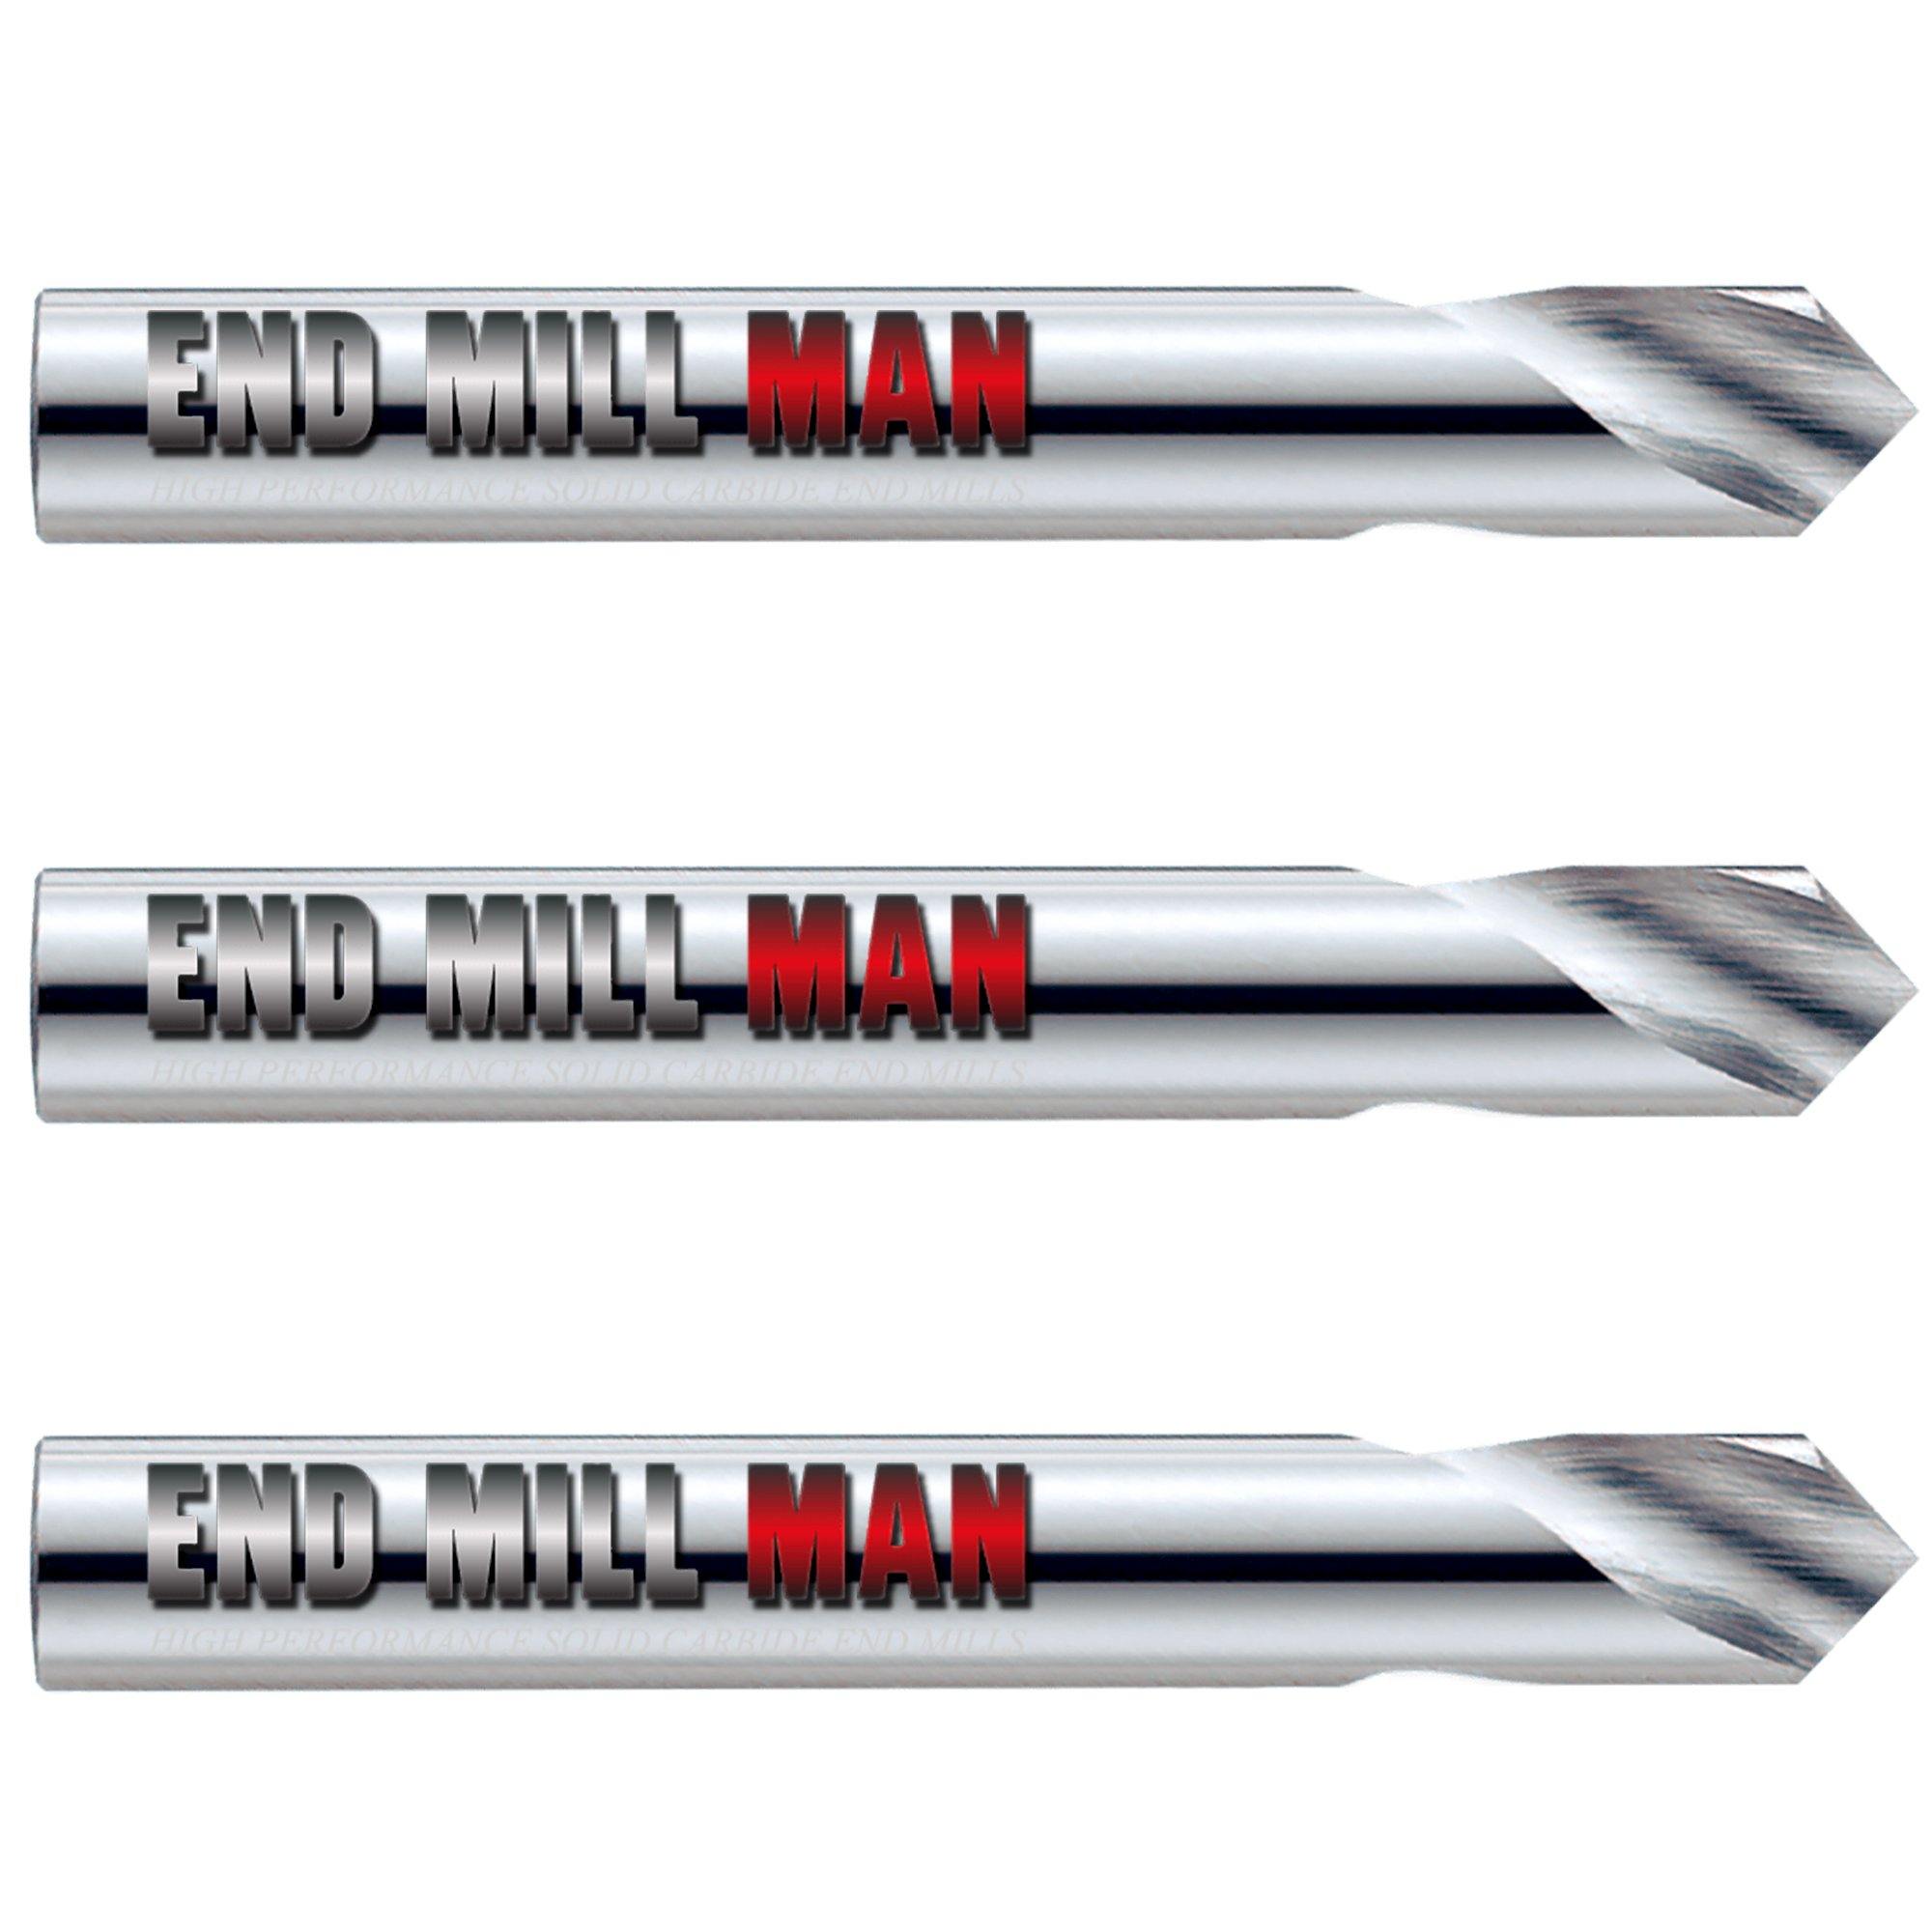 (3 Pack) 3/4" x 1-1/2" x 4" Carbide Spotting Drills - The End Mill Store 